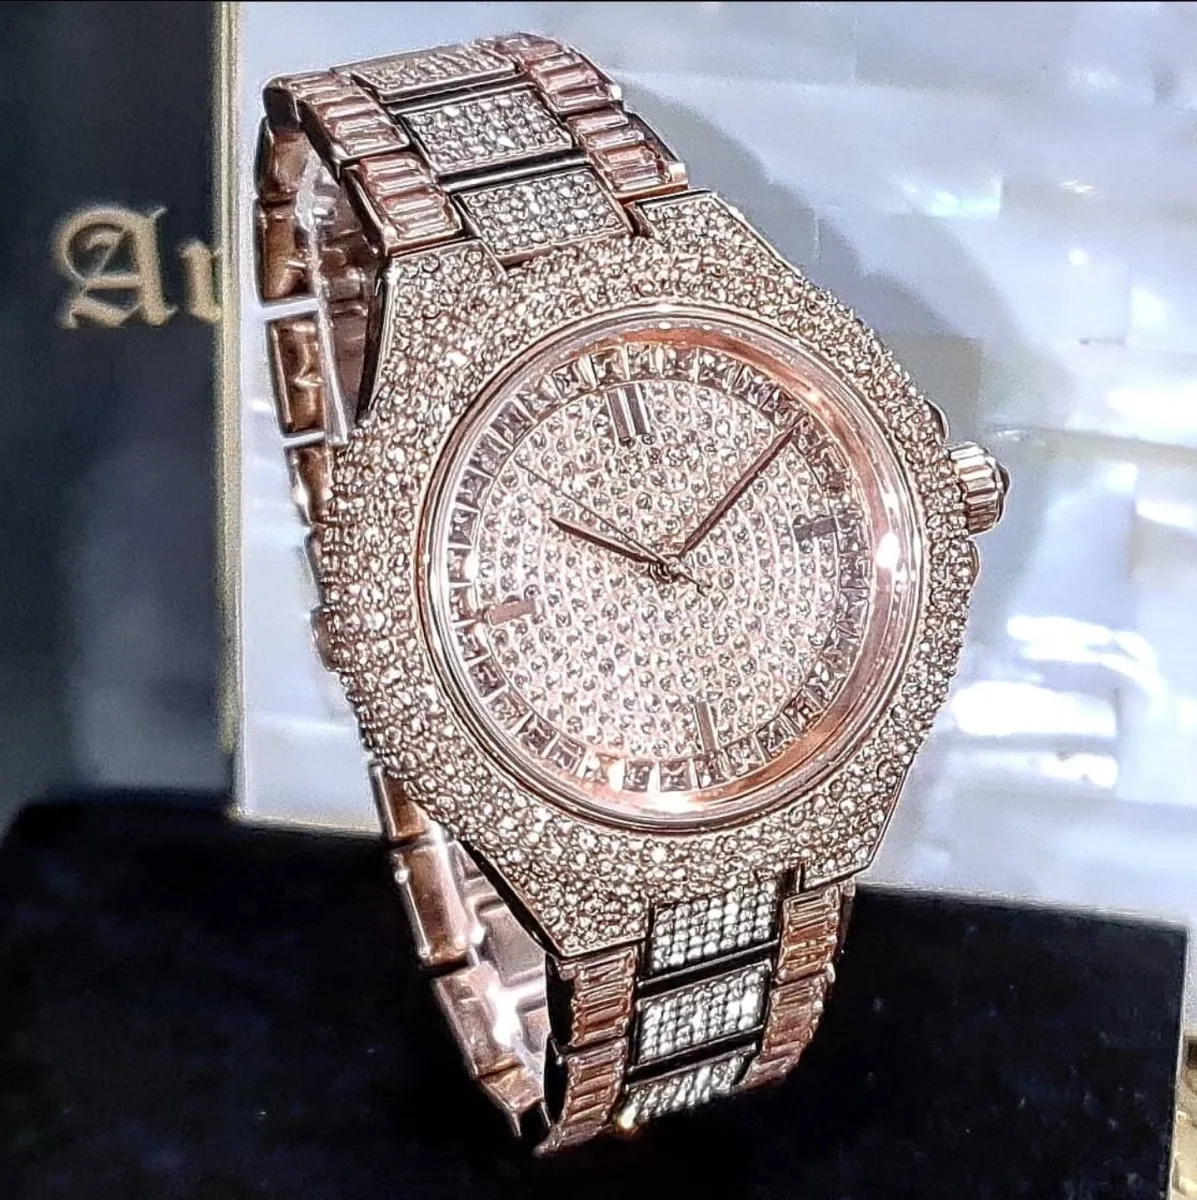 MIchael Kors Lexington Chronograph Dial Unisex Watch  Gold Watch WATCHES  MANDILAX  Online Mens Jewelry Store Lagos  Iced Out and customized Jewelry